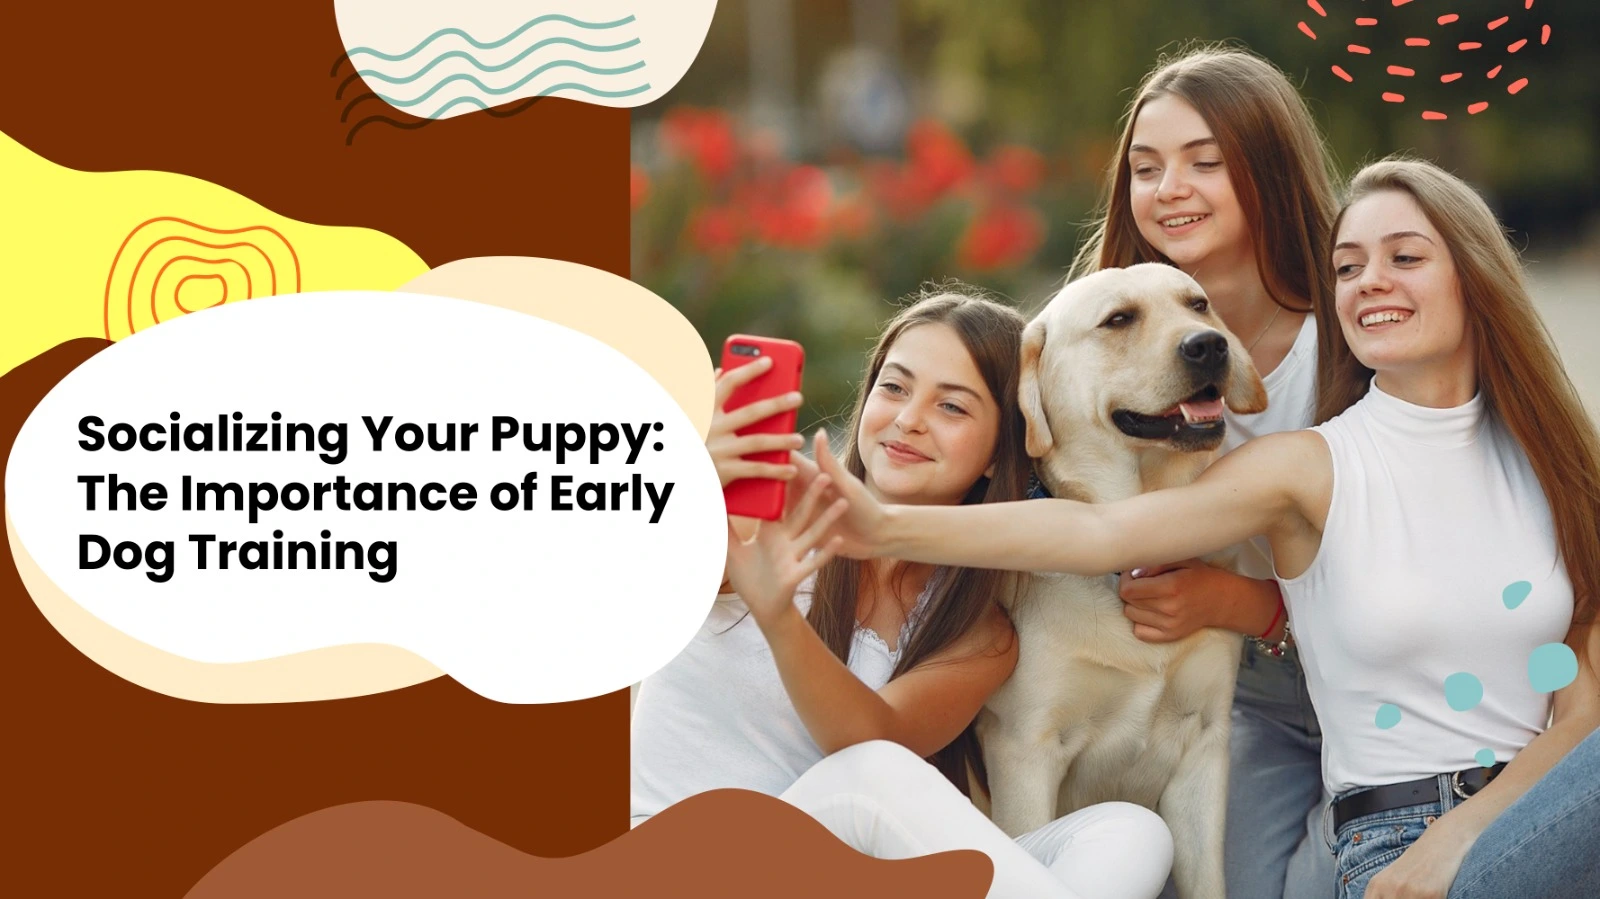 Socializing Your Puppy: The Importance of Early Dog Training